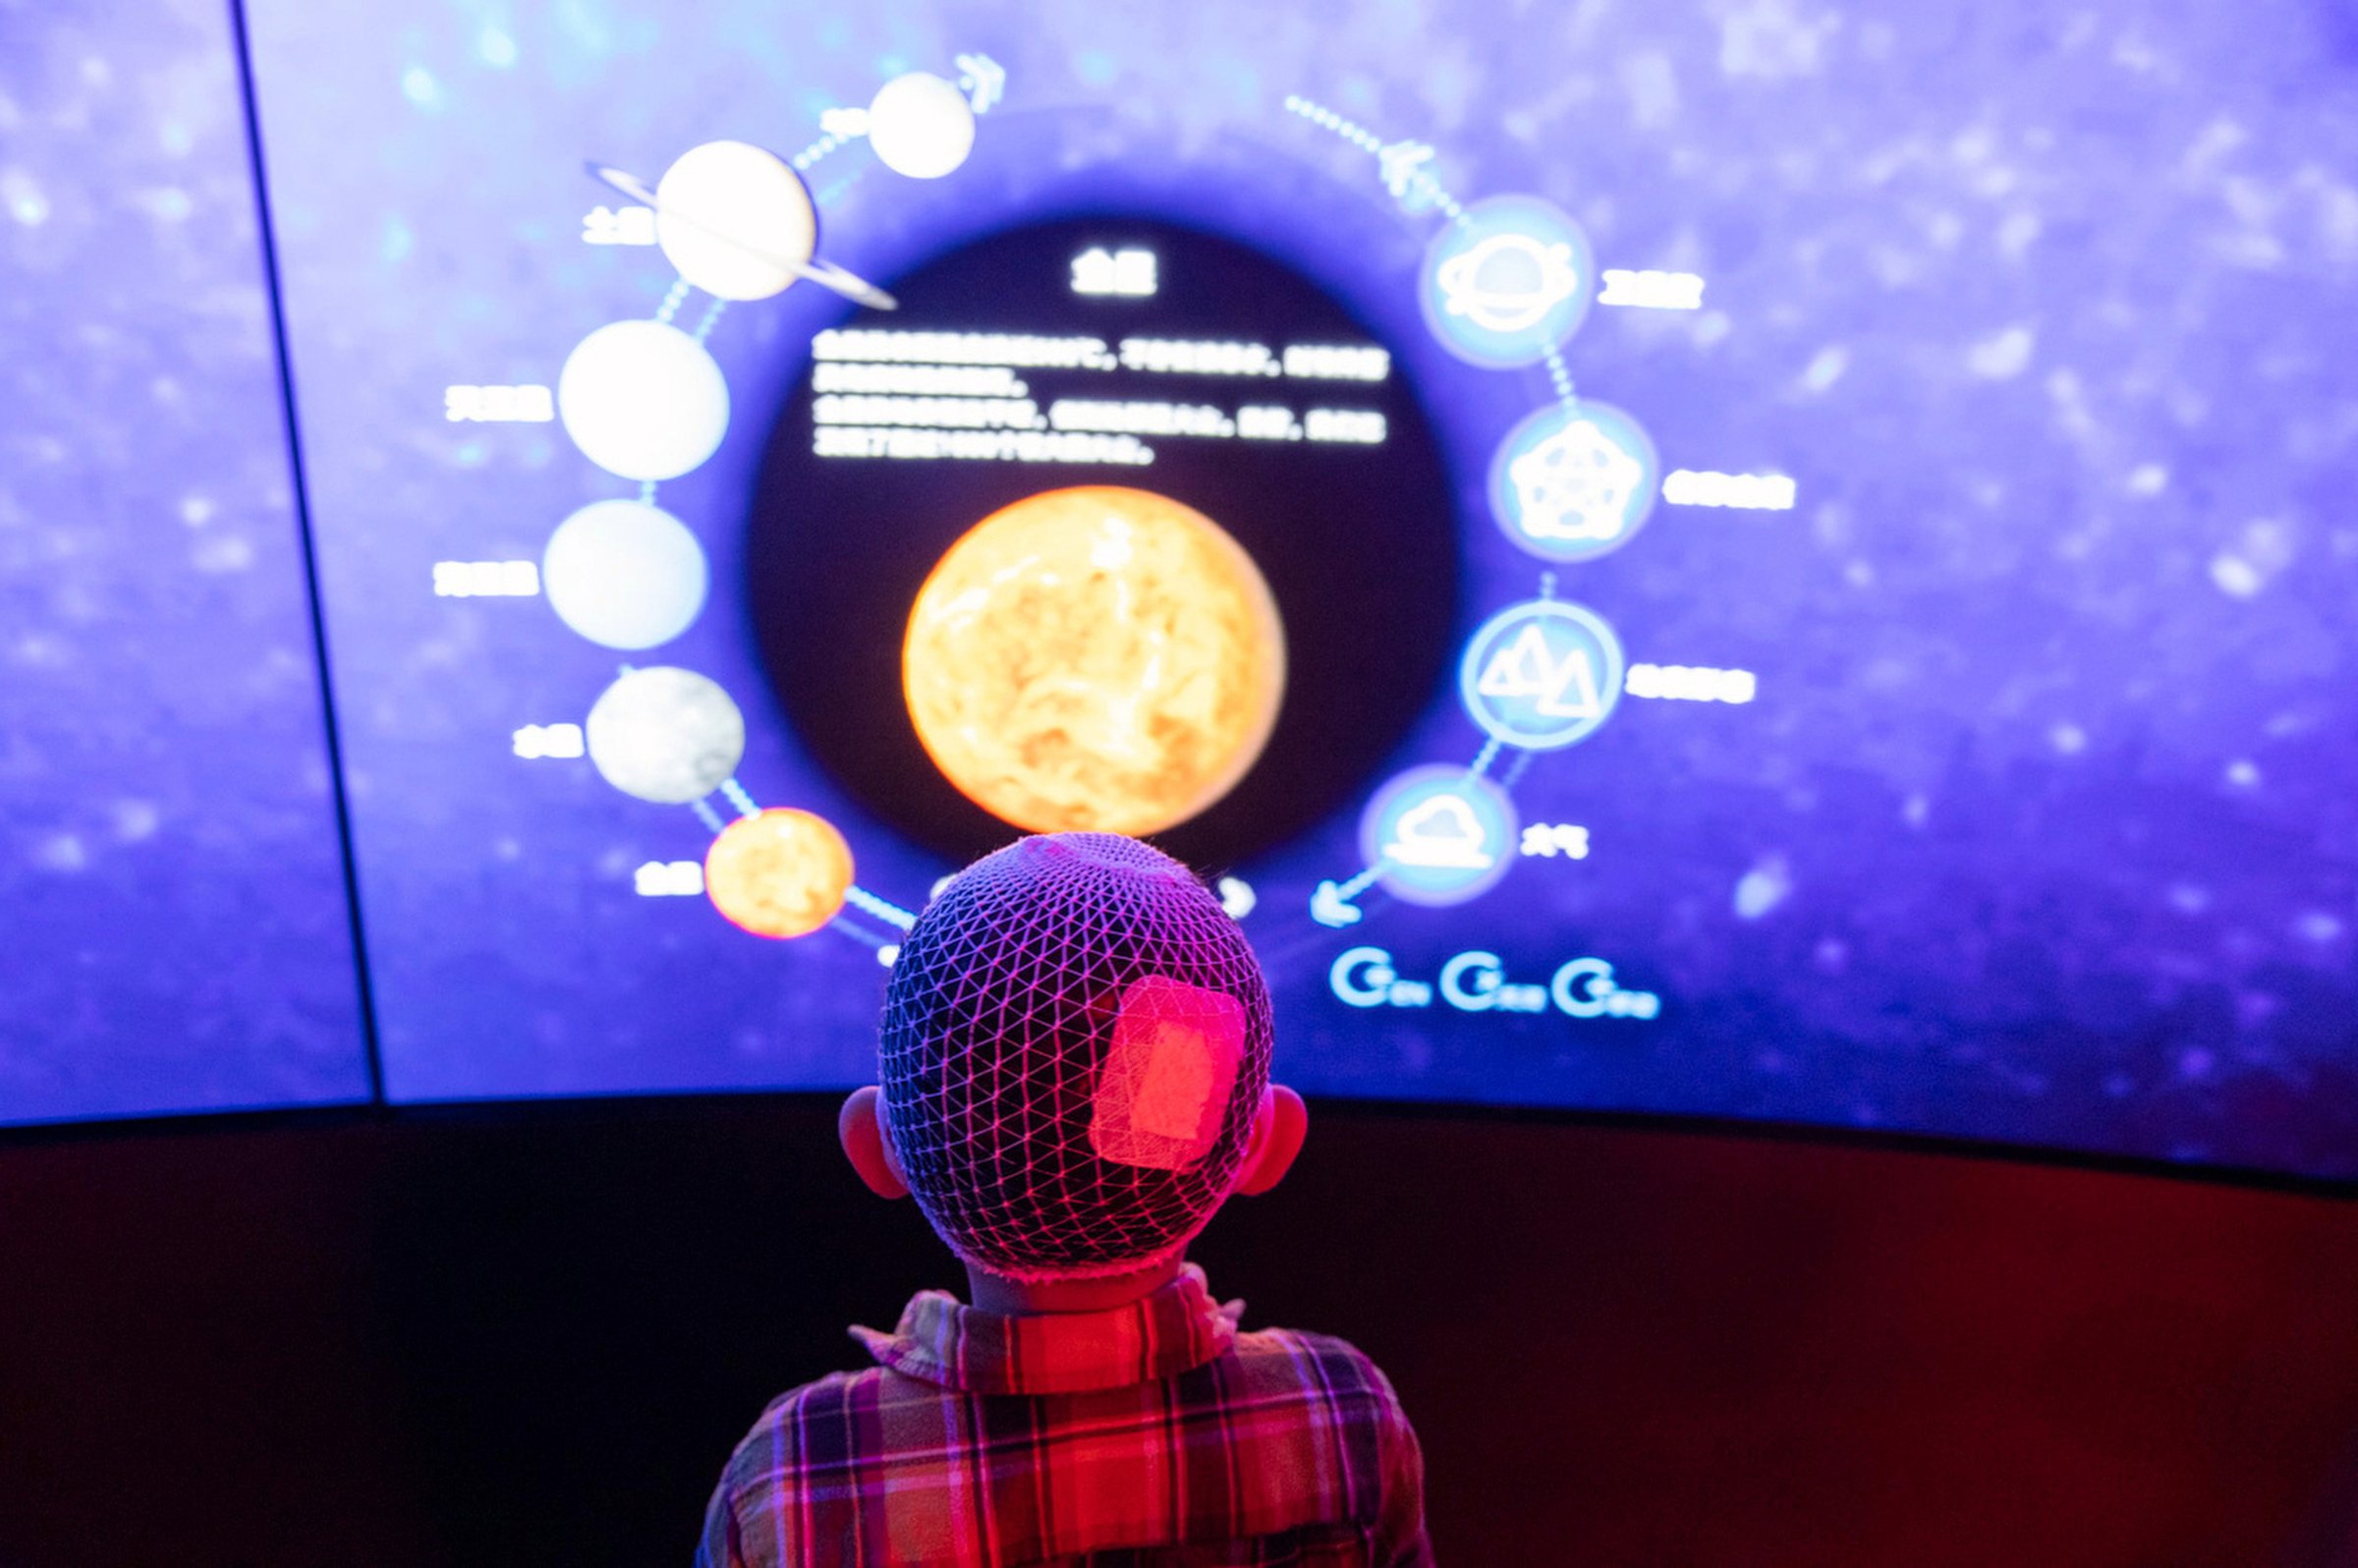  Visitor at the Shanghai Astronomy Museum, the world's largest planetarium. In the last decade China is investing into many space related projects and facilities to popularize space exploration and inspire the younger generations.  